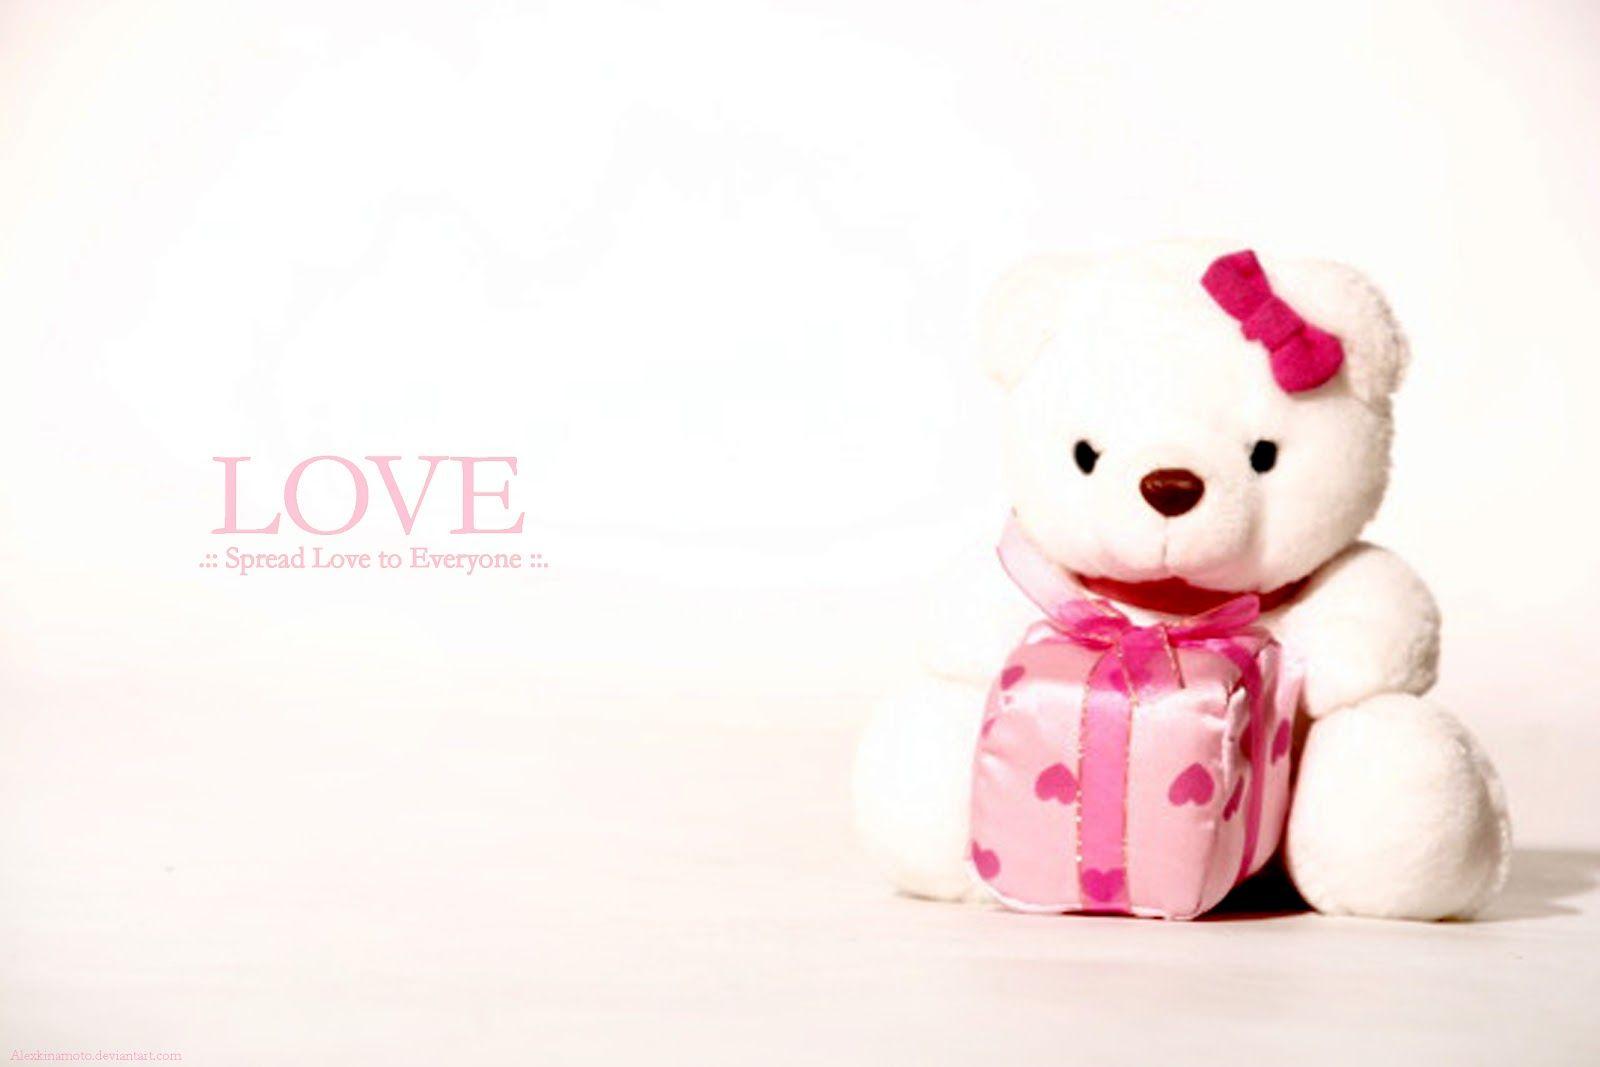 Cute Teddy Bear Gift for Valentines Day HD Wallpaper. High